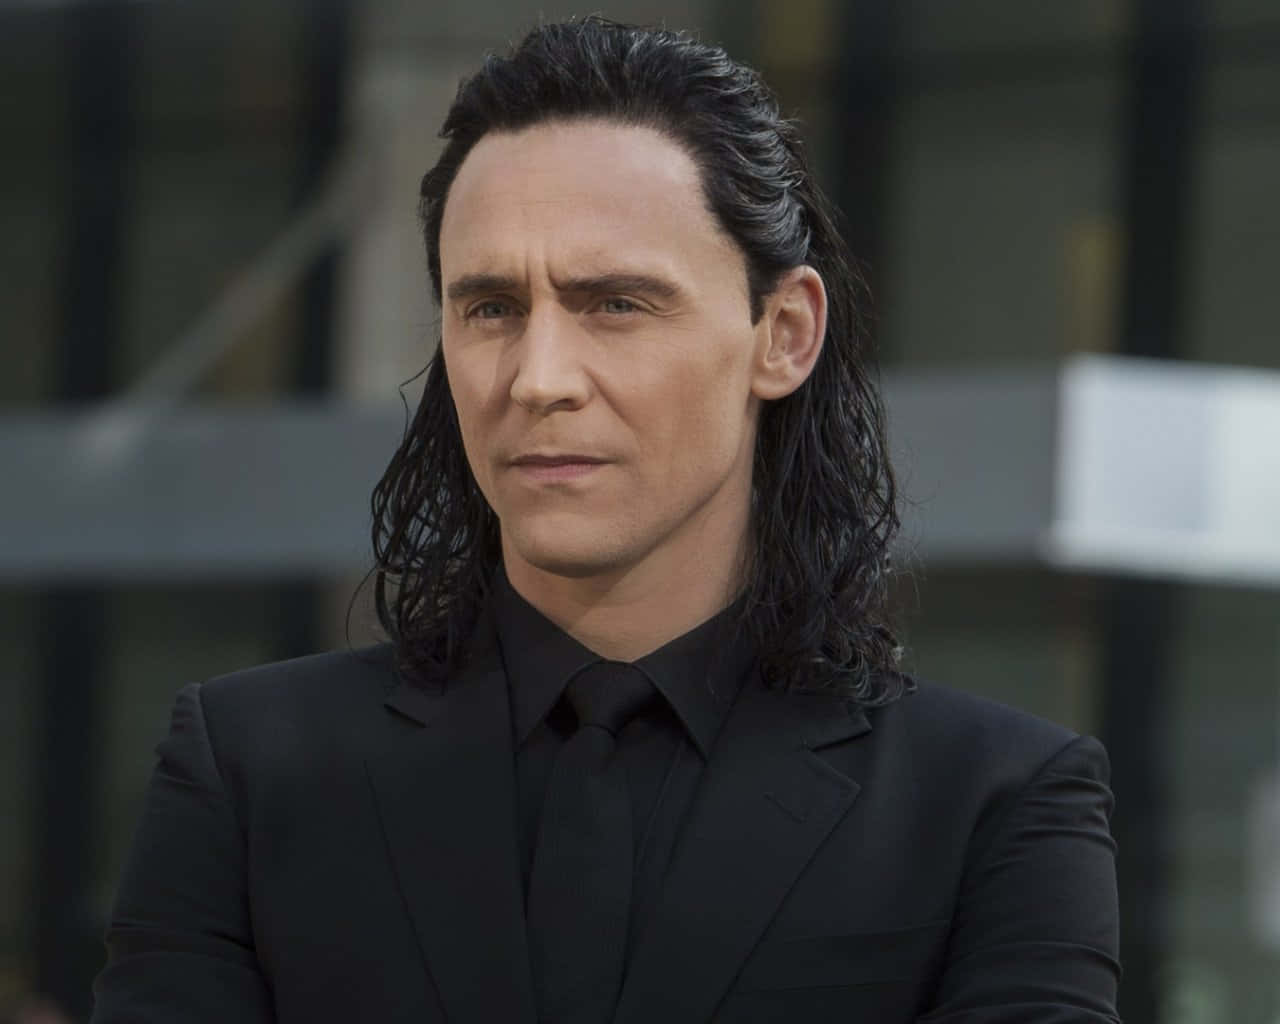 The Cunning God, Loki - Master of Mischief and Deception